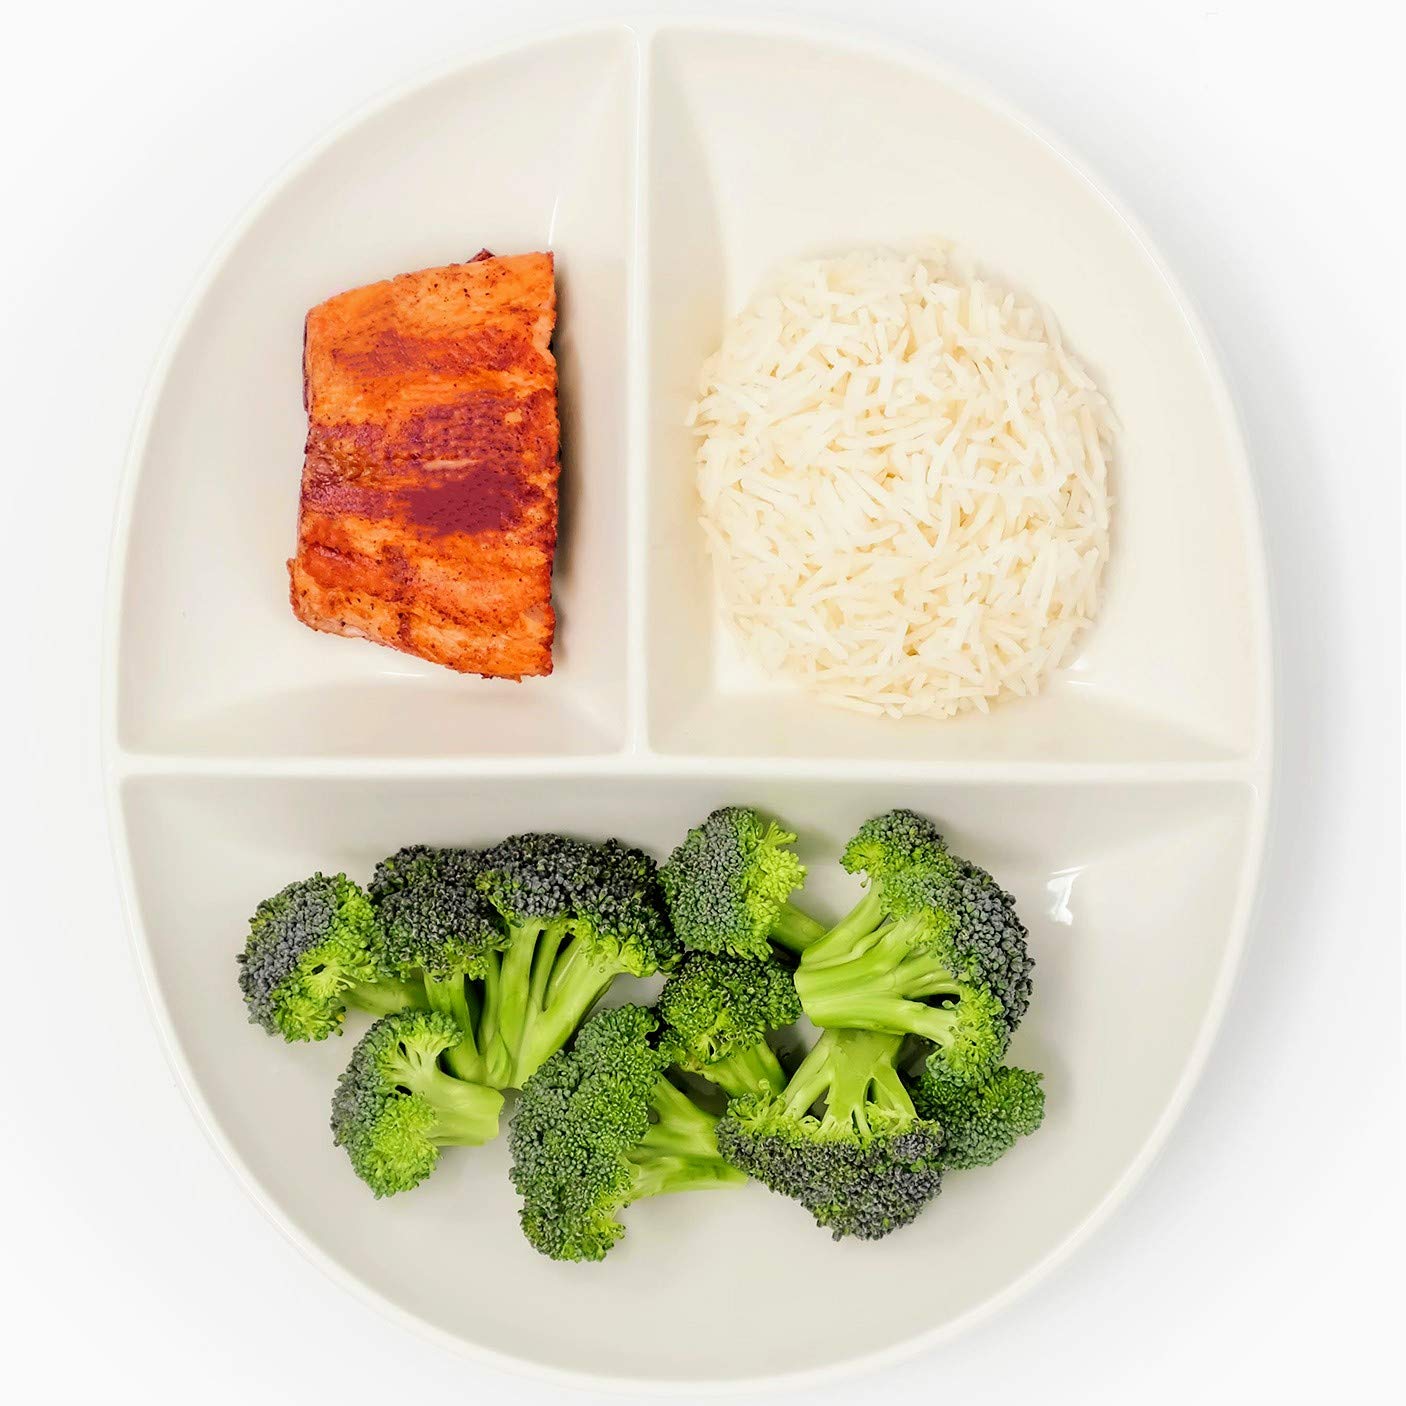 “Mastering Portion Control: 8 Tips for a Healthier Diet”